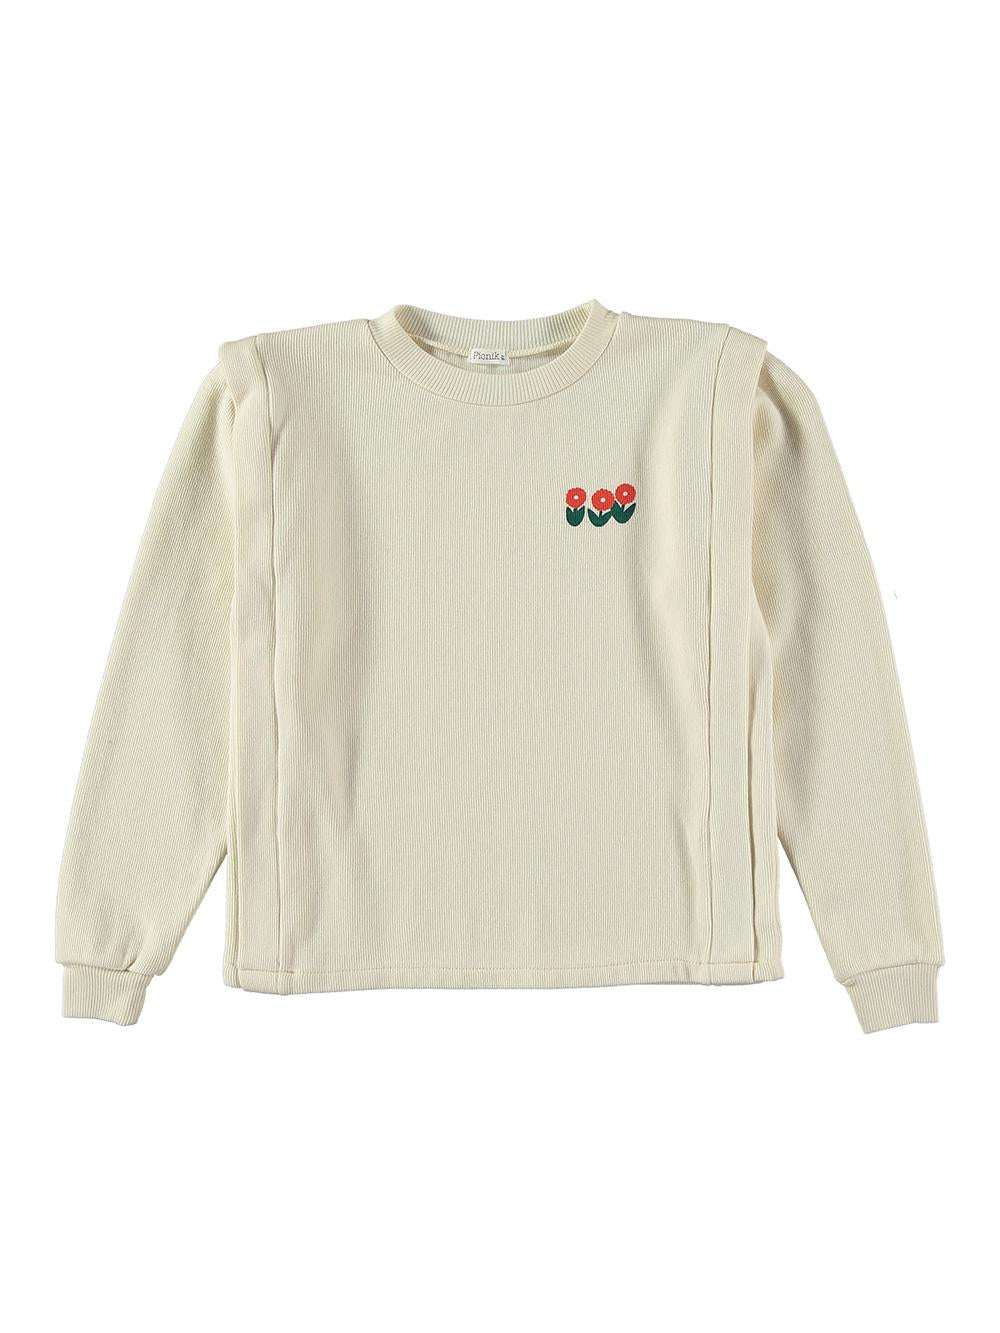 OFF WHITE FLOWER EMBROIDERED SHOULDER SWEATER